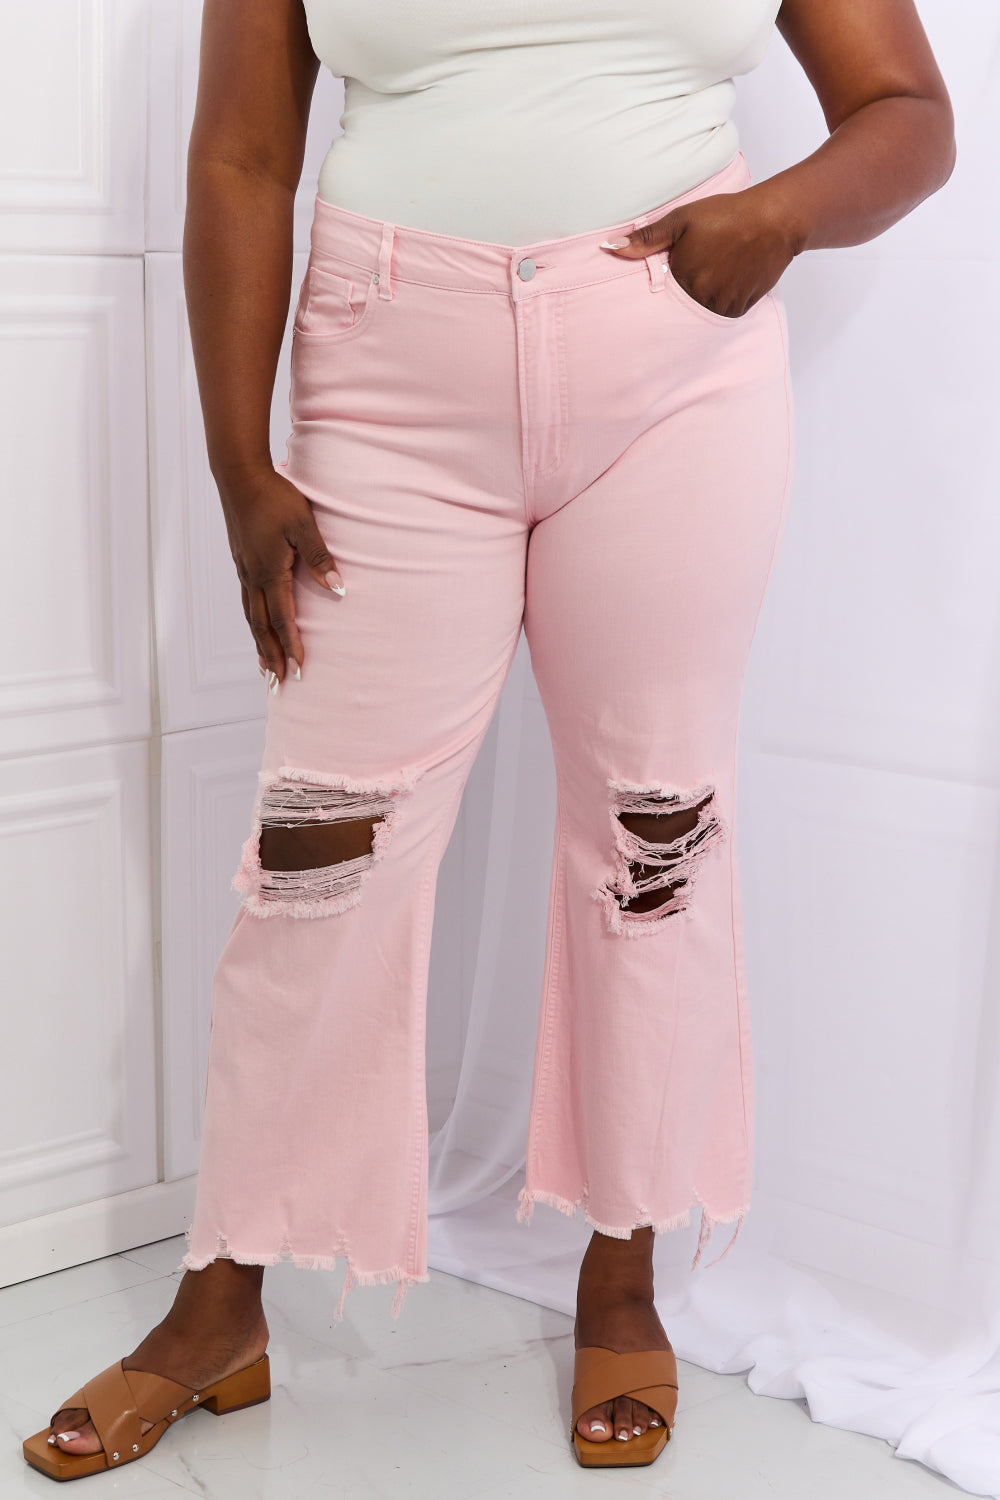 RISEN Miley Distressed Ankle Flare Jeans - Online Only